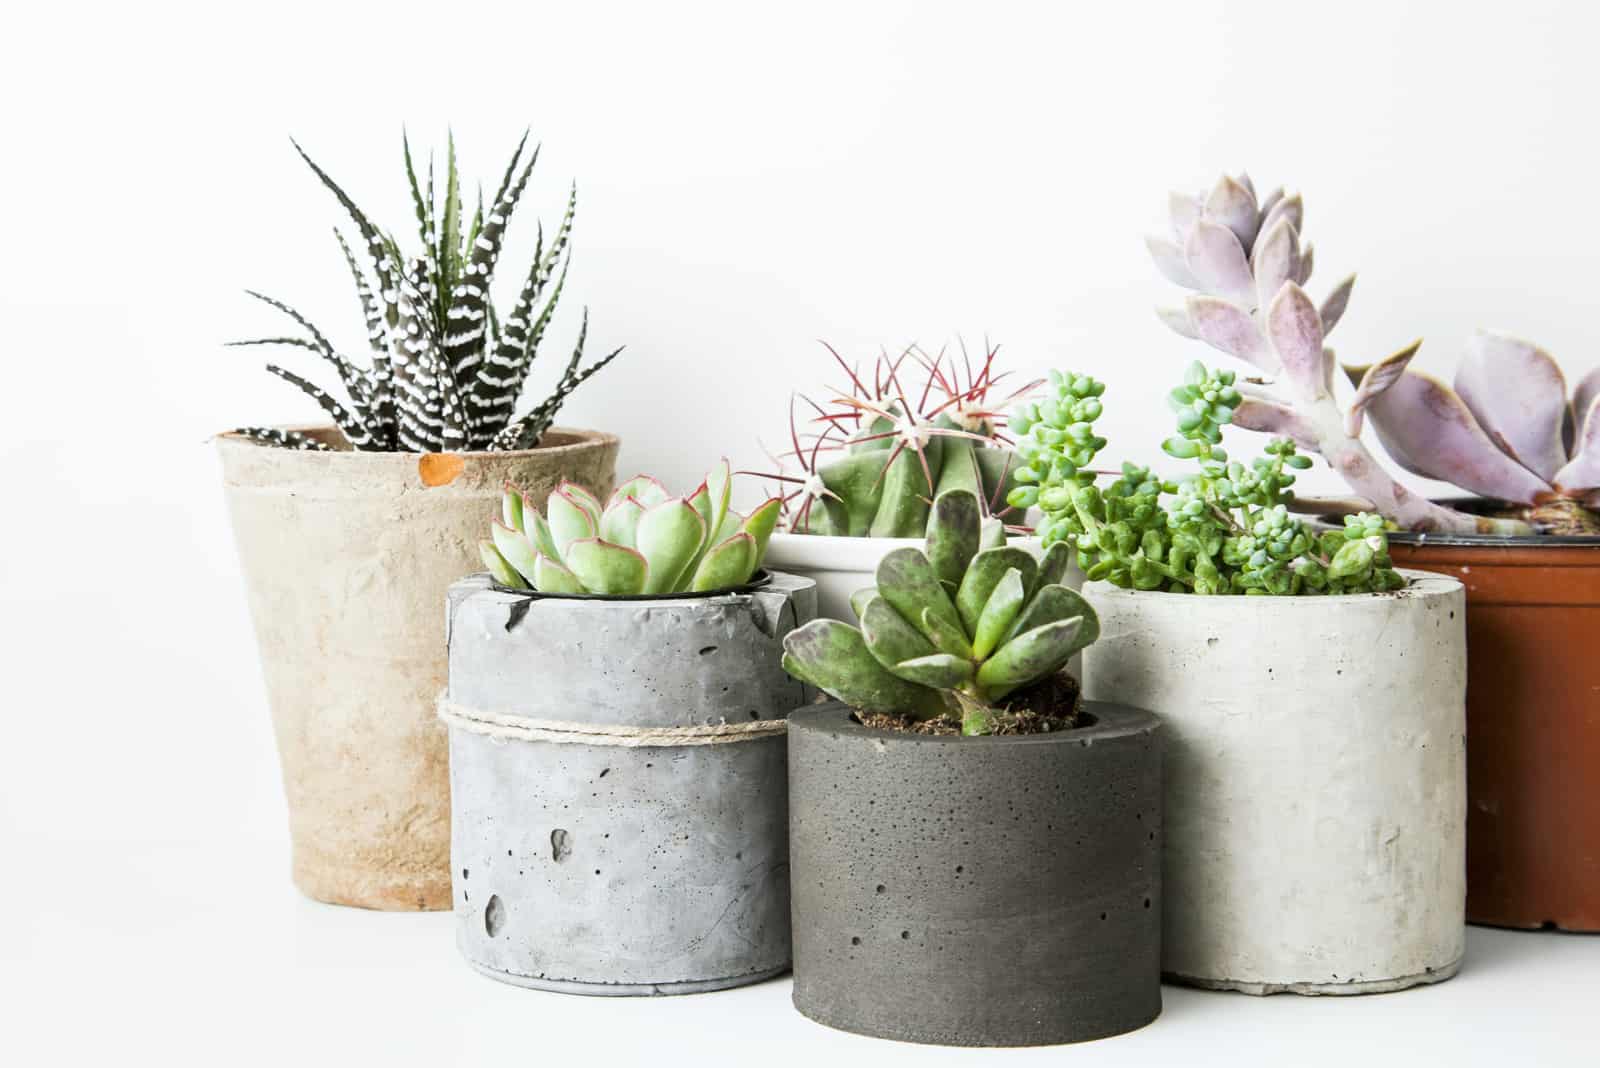 Do Succulents Like Humidity? It’s Time To Find Out